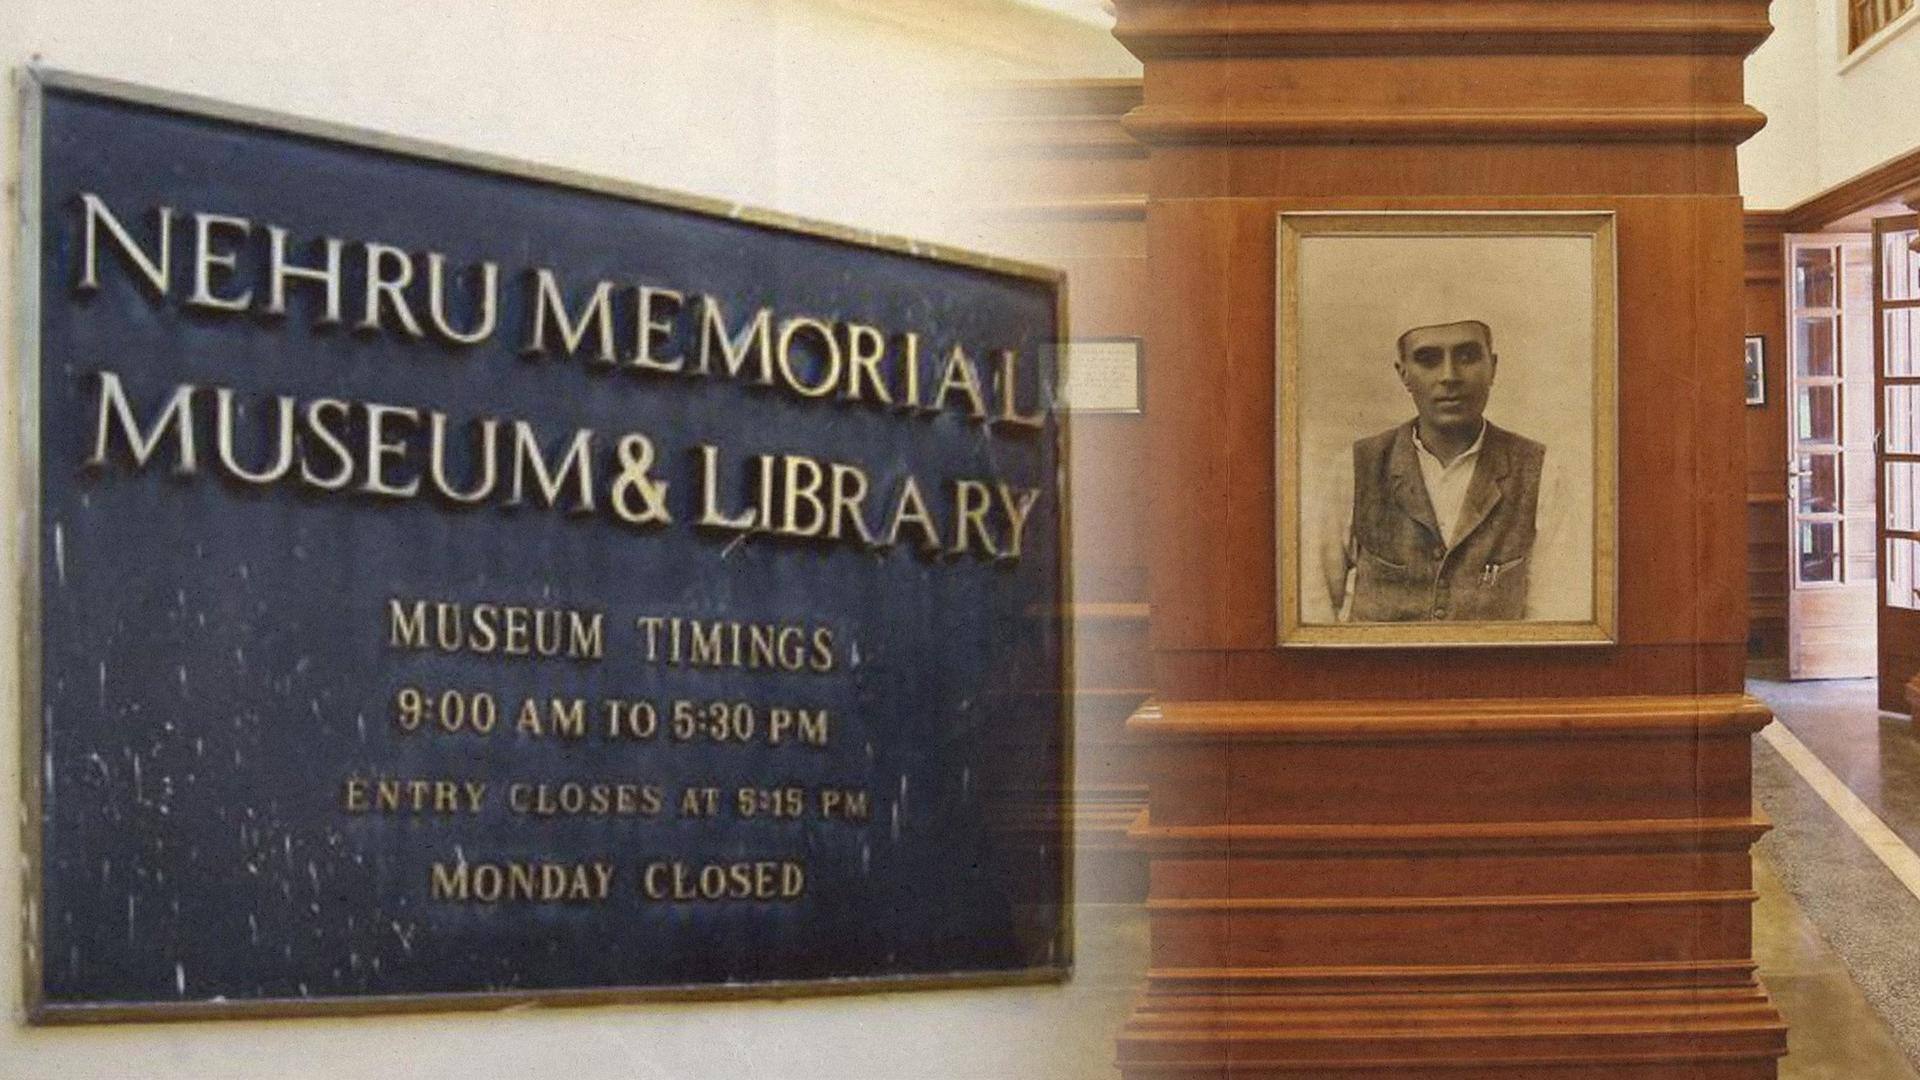 Modi faces backlash after Nehru's name dropped from historic museum